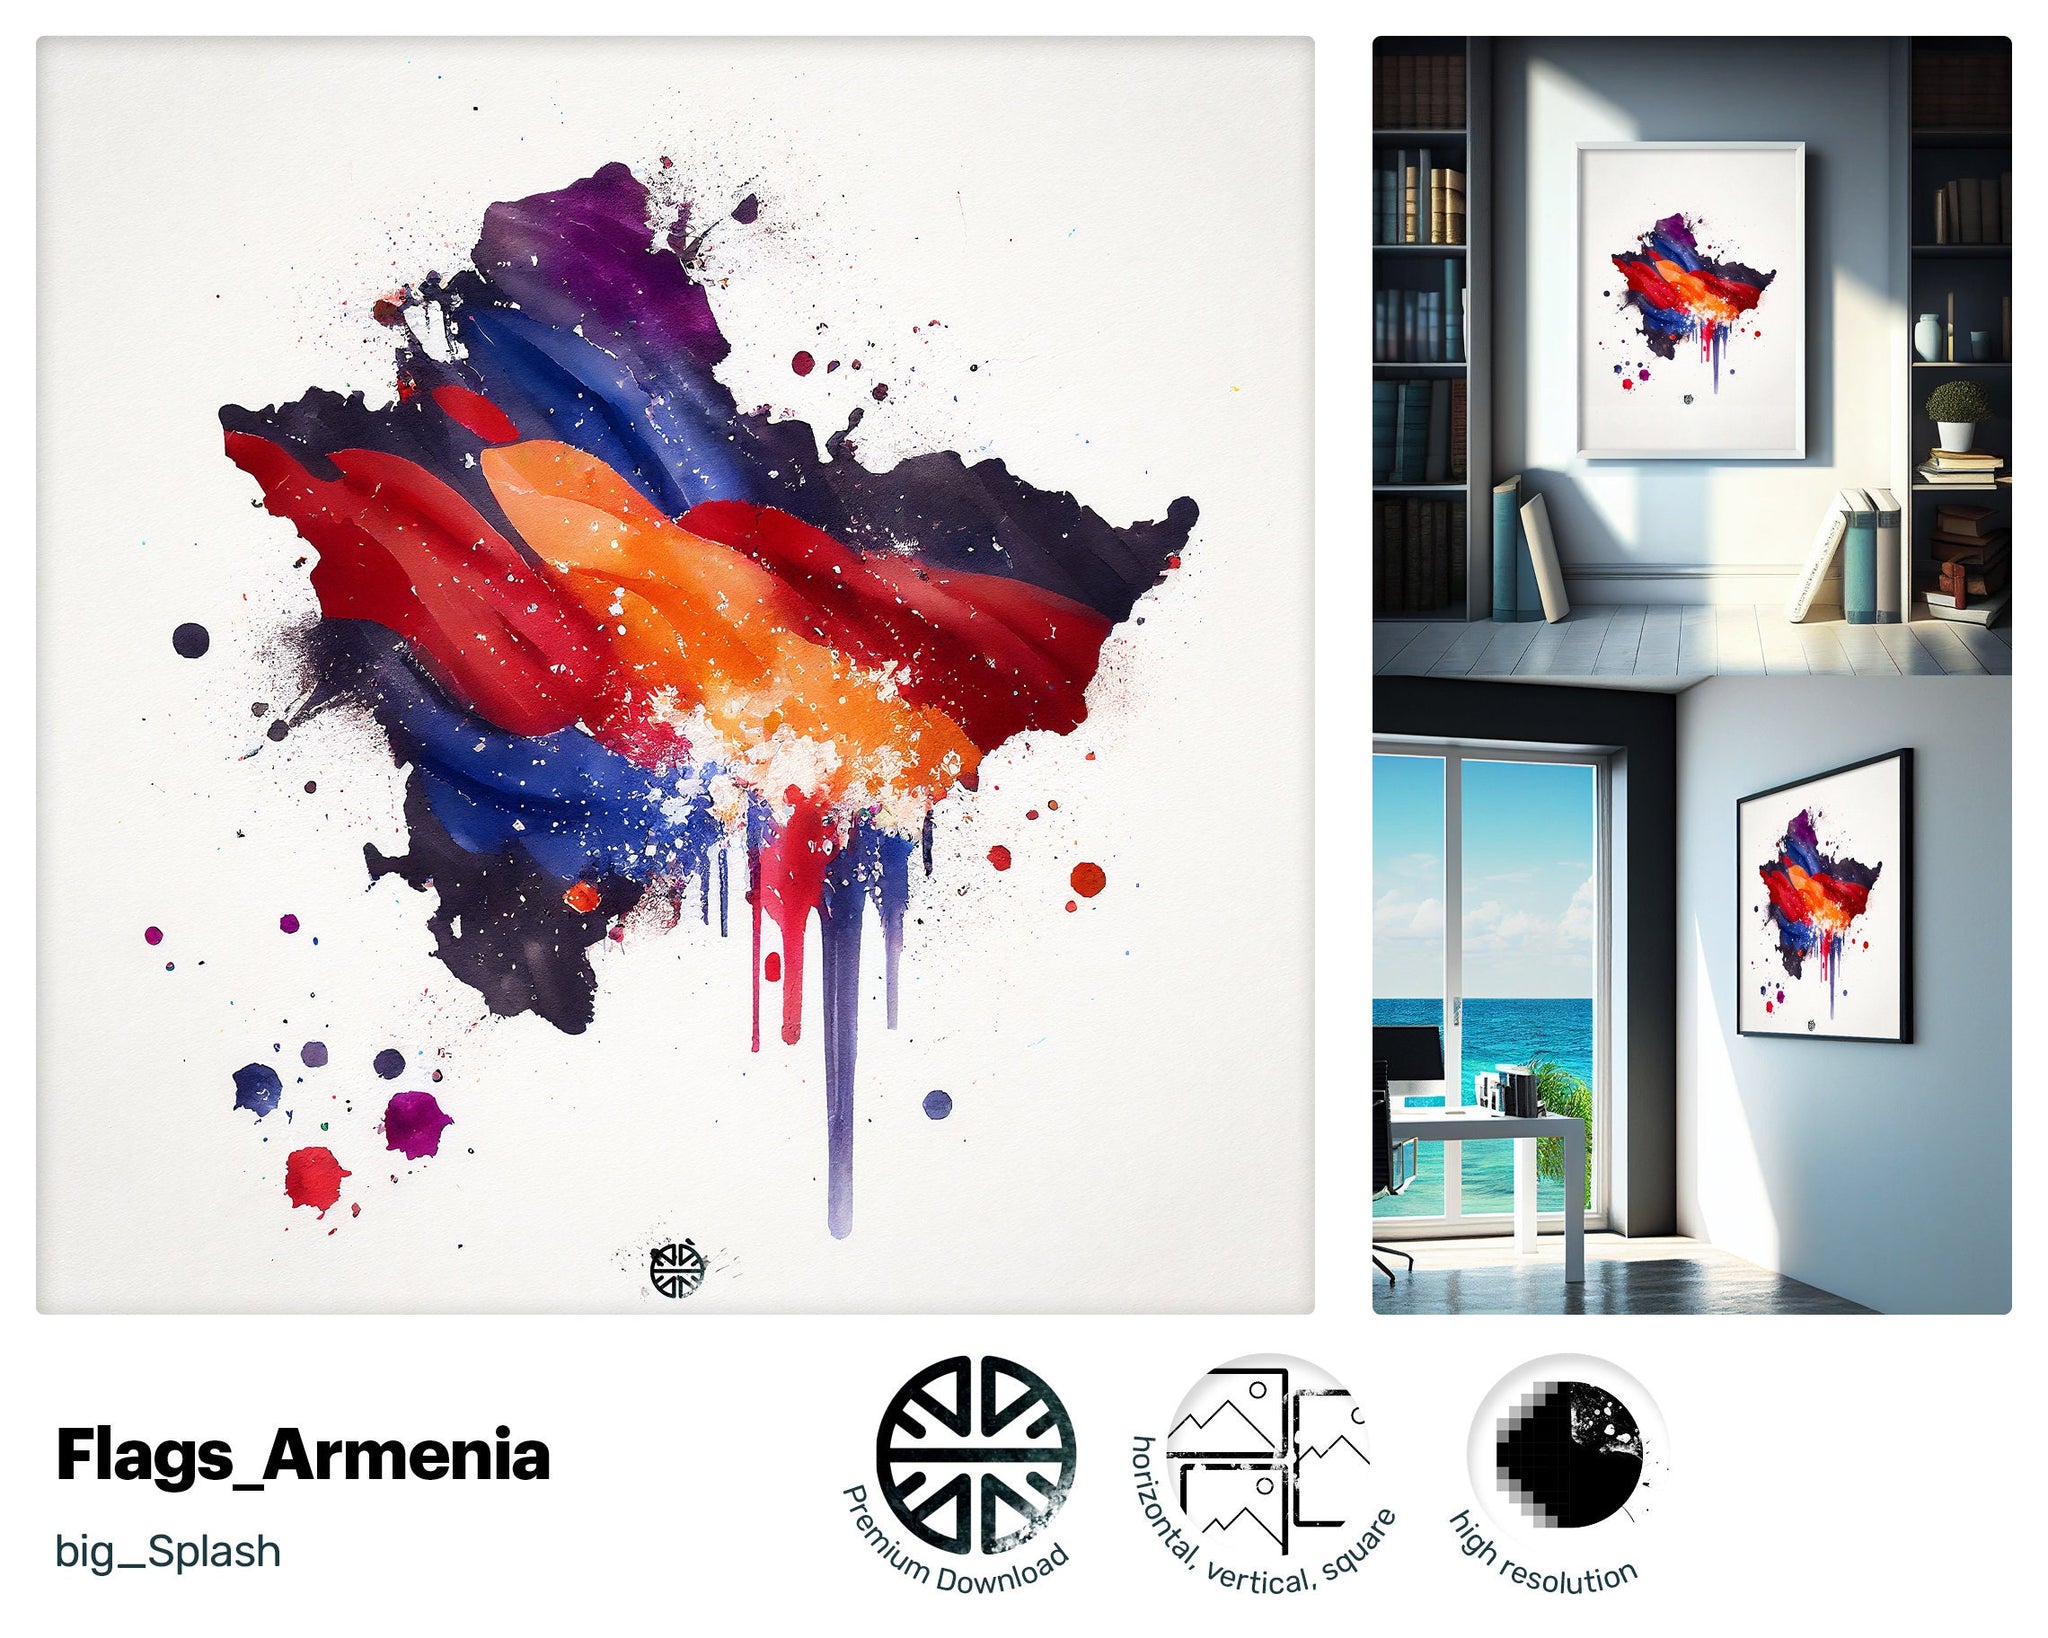 Tall Marvelous Armenian flag, Graceful Oozing with charm PNG File, Zany Quaint Fantastic Adorable Vivacious Design